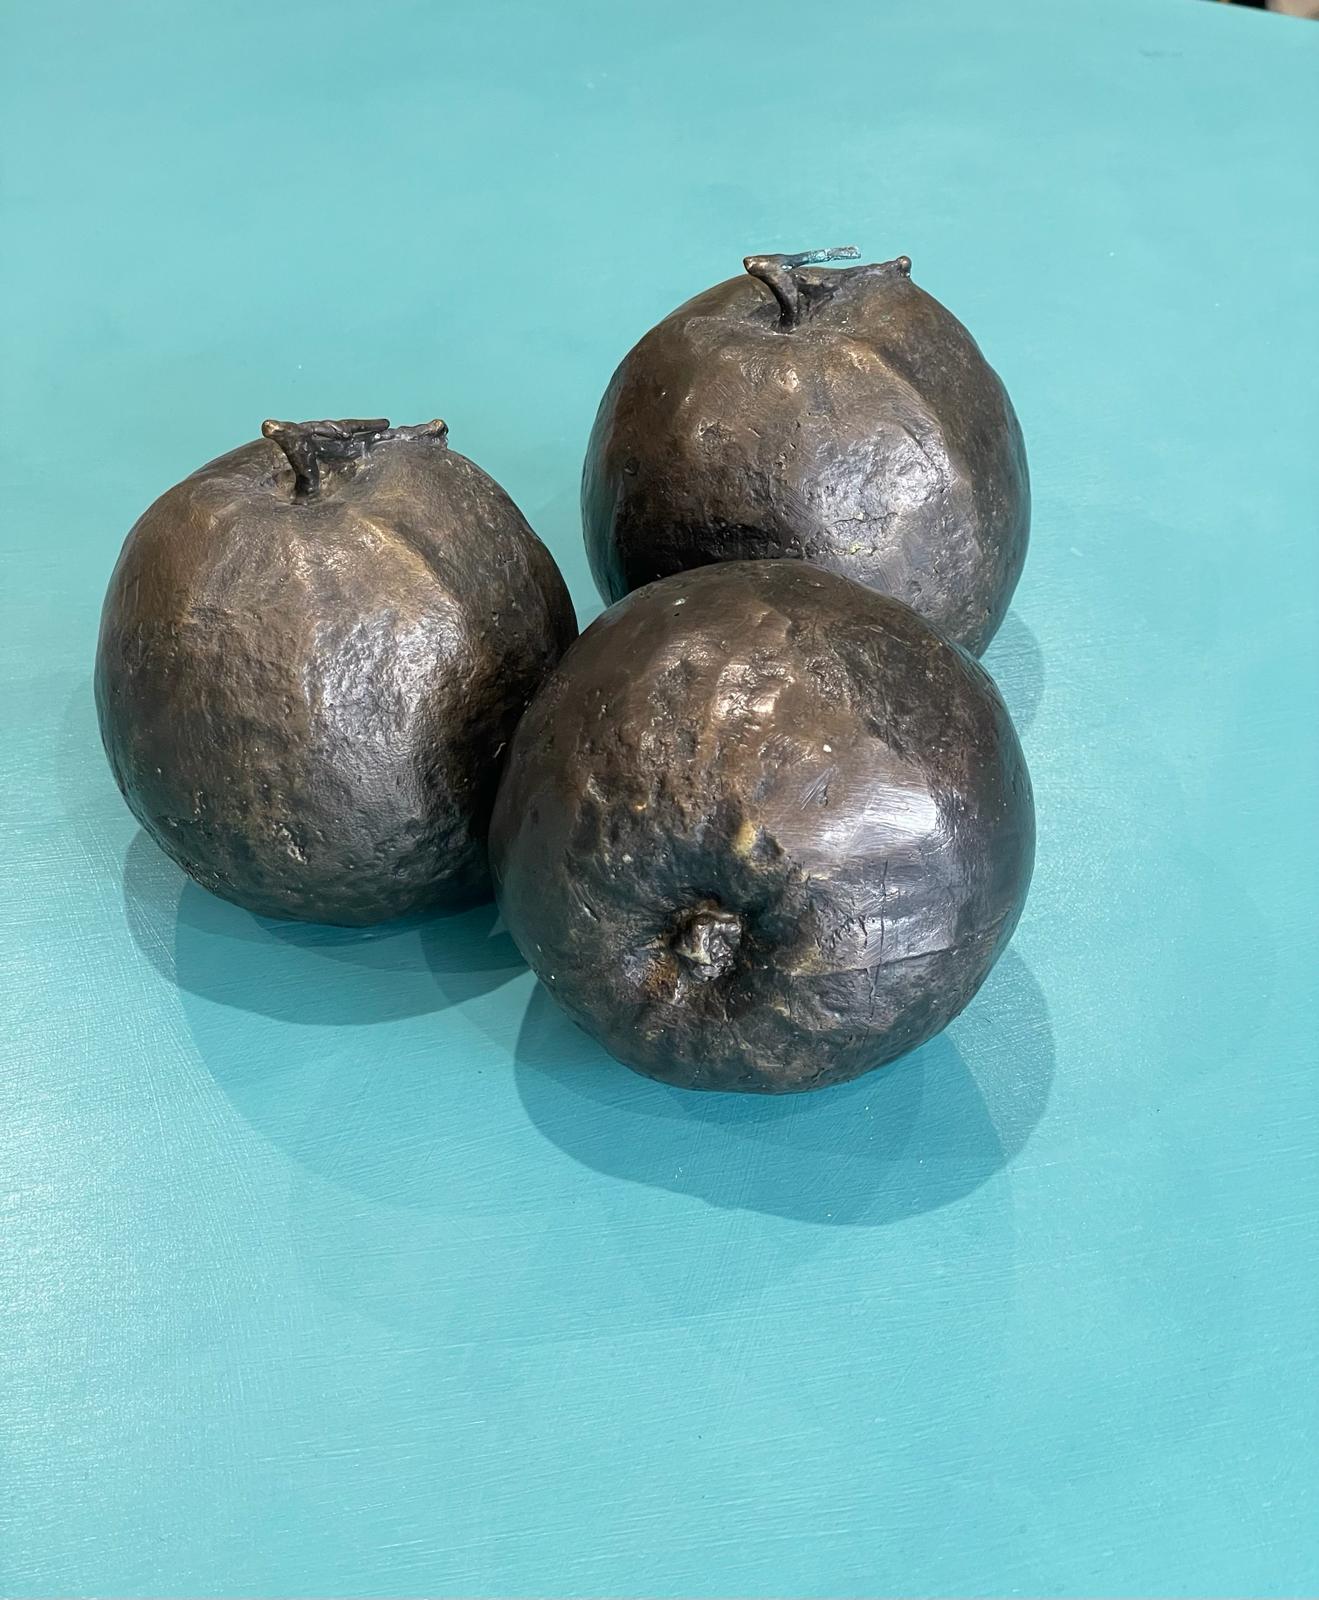 fifisfancyfurniture I have three of these gorgeous heavy solid bronze apples.
Lovely as table decoration or stopping the table cloth from blowing away on the al fresco dining table!!
H 11 cms
Diameter 10 cms
£19.95 each (or all 3 with 10% discount)
s/n K31G